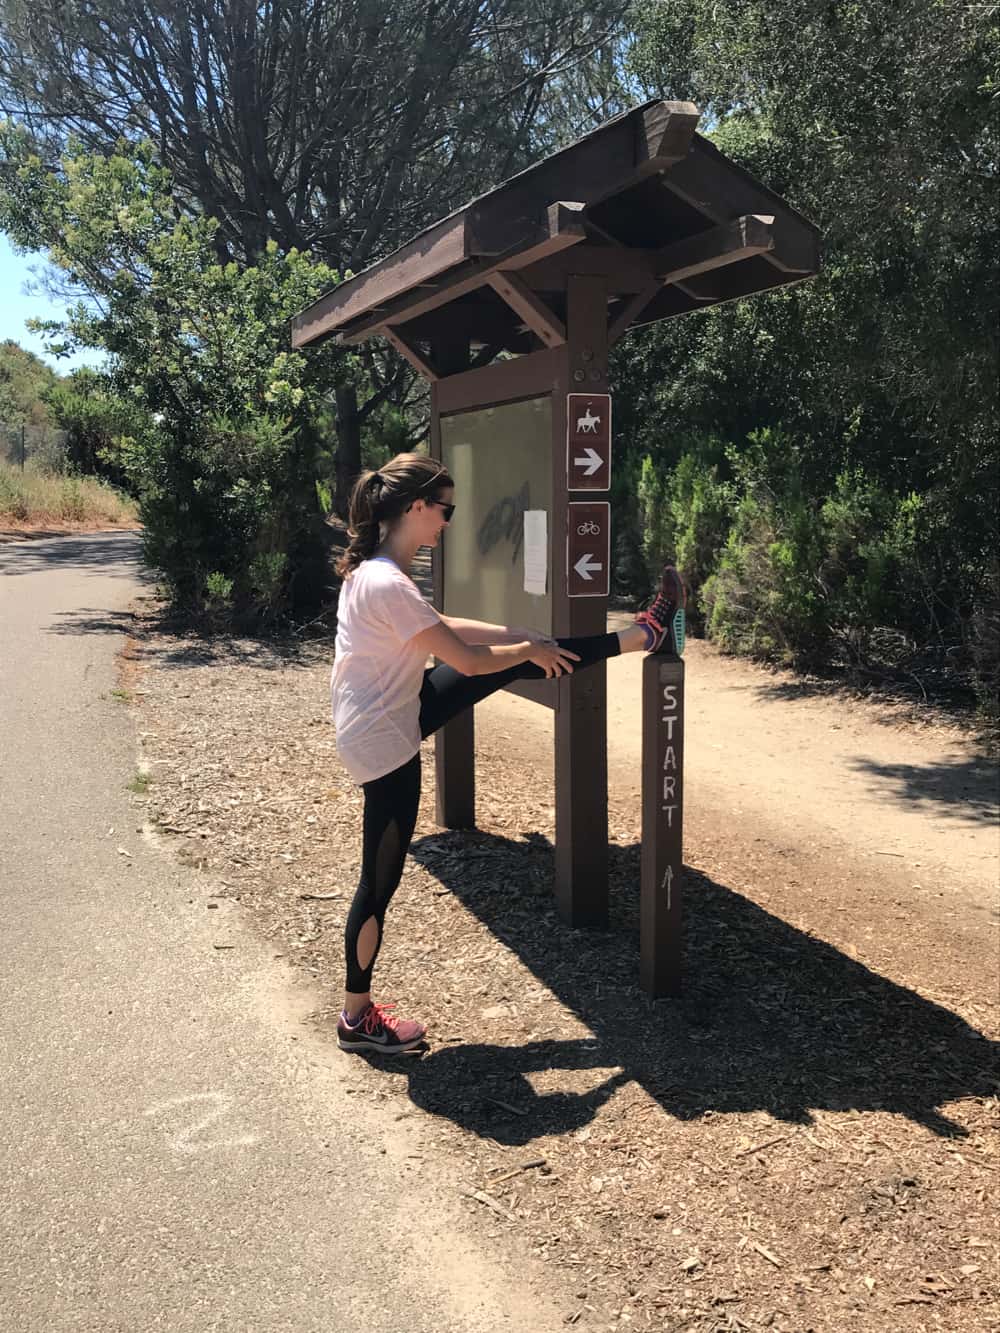 brunette female stretching leg on a park sign near a hiking trail map